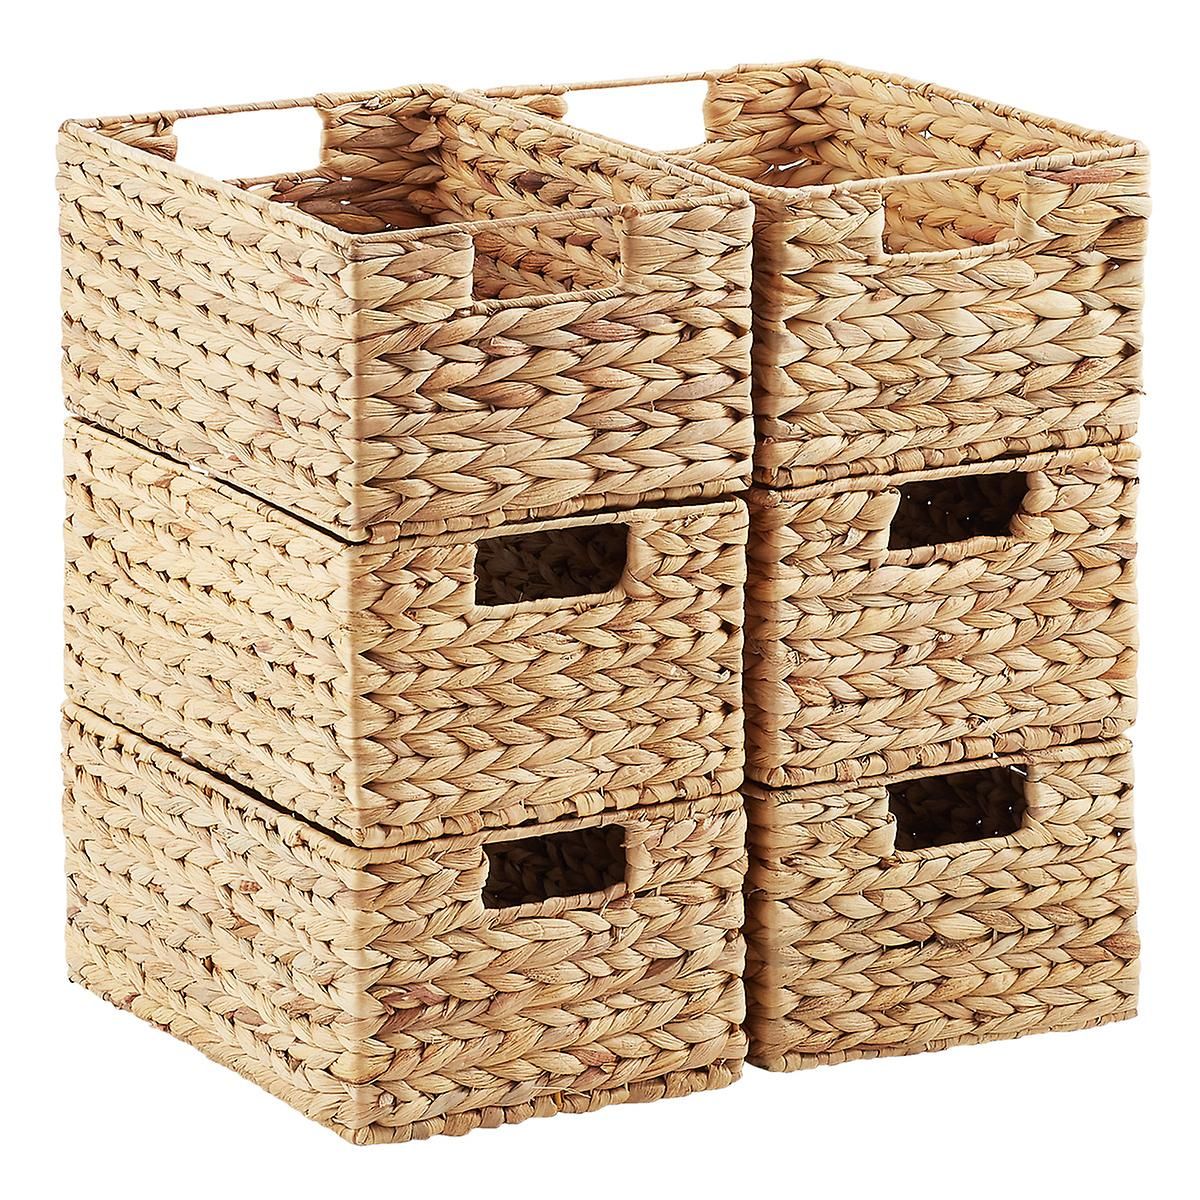 Case of 6 Small Water Hyacinth Bin Natural | The Container Store